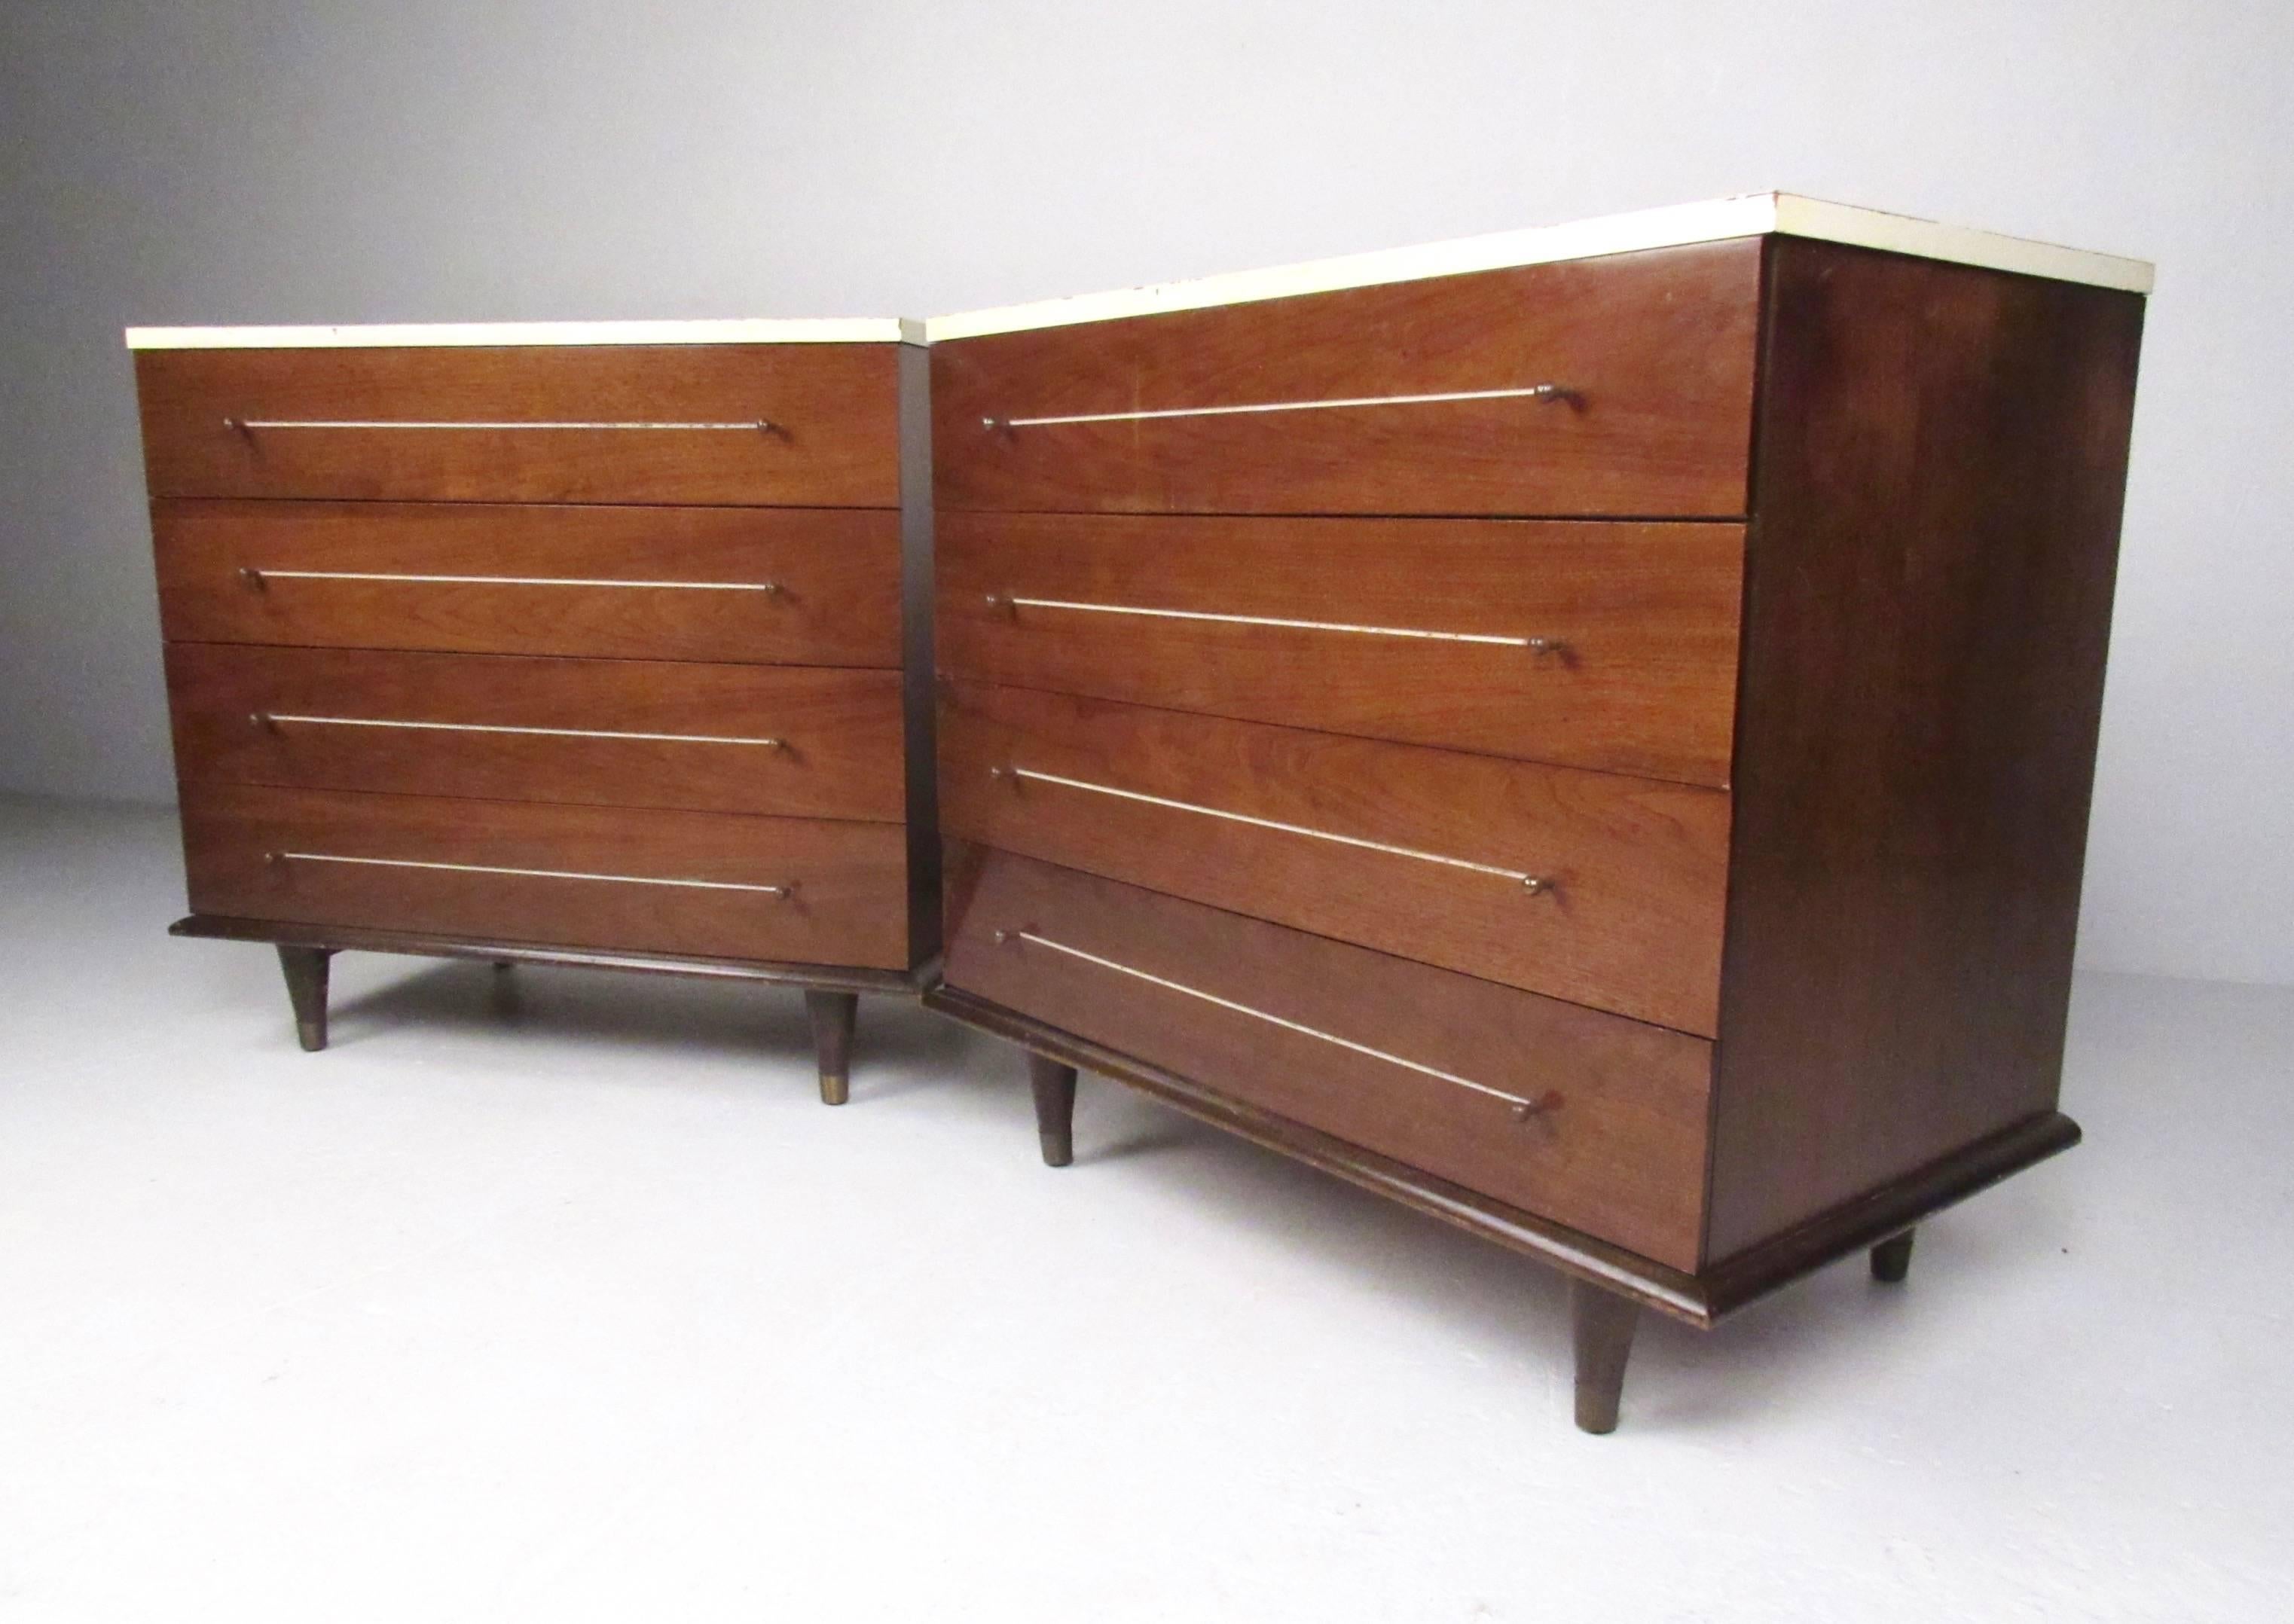 This pair of American modern dressers each feature four wide drawers for ample bedroom storage. Unique white tops, circular drawer pulls and tapered brass sabot legs add to the Mid-Century style of this pair of Link Taylor bachelor chests. Please